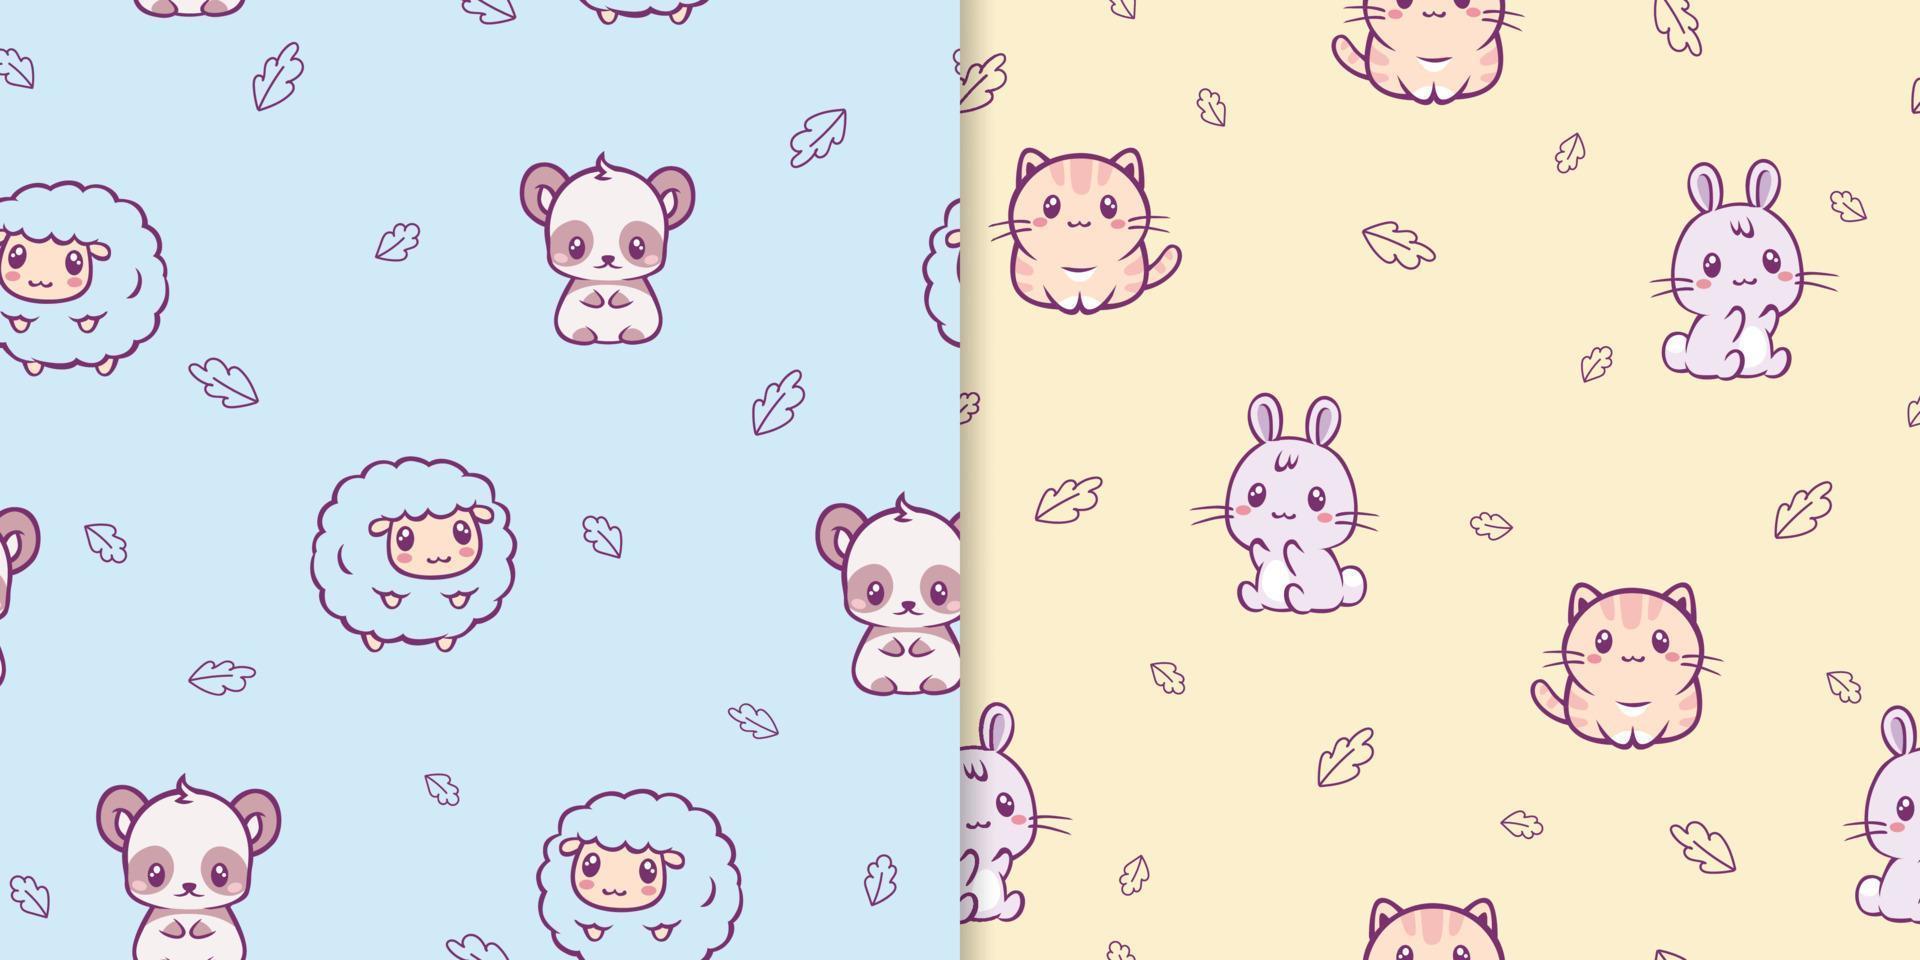 Anime kawaii animals seamless pattern. Cute lamb with red spots and mane small pink funny kitten with yellow fur smiling hare and blue bear pensive multicolor vector. vector